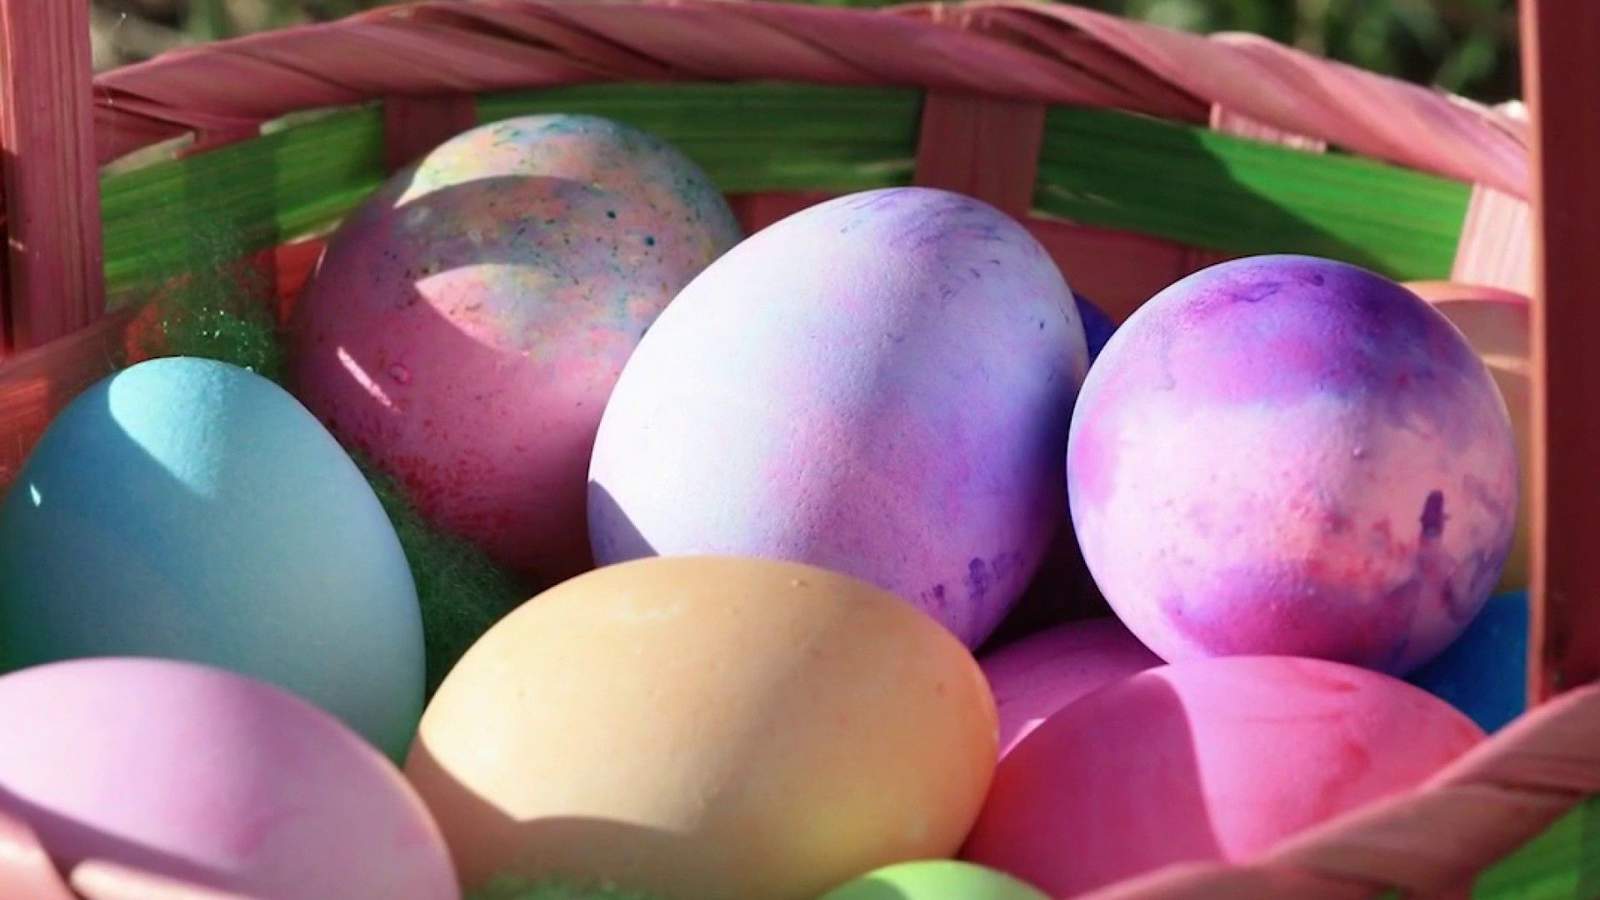 Advice for celebrating Easter safely as COVID cases in Michigan surge